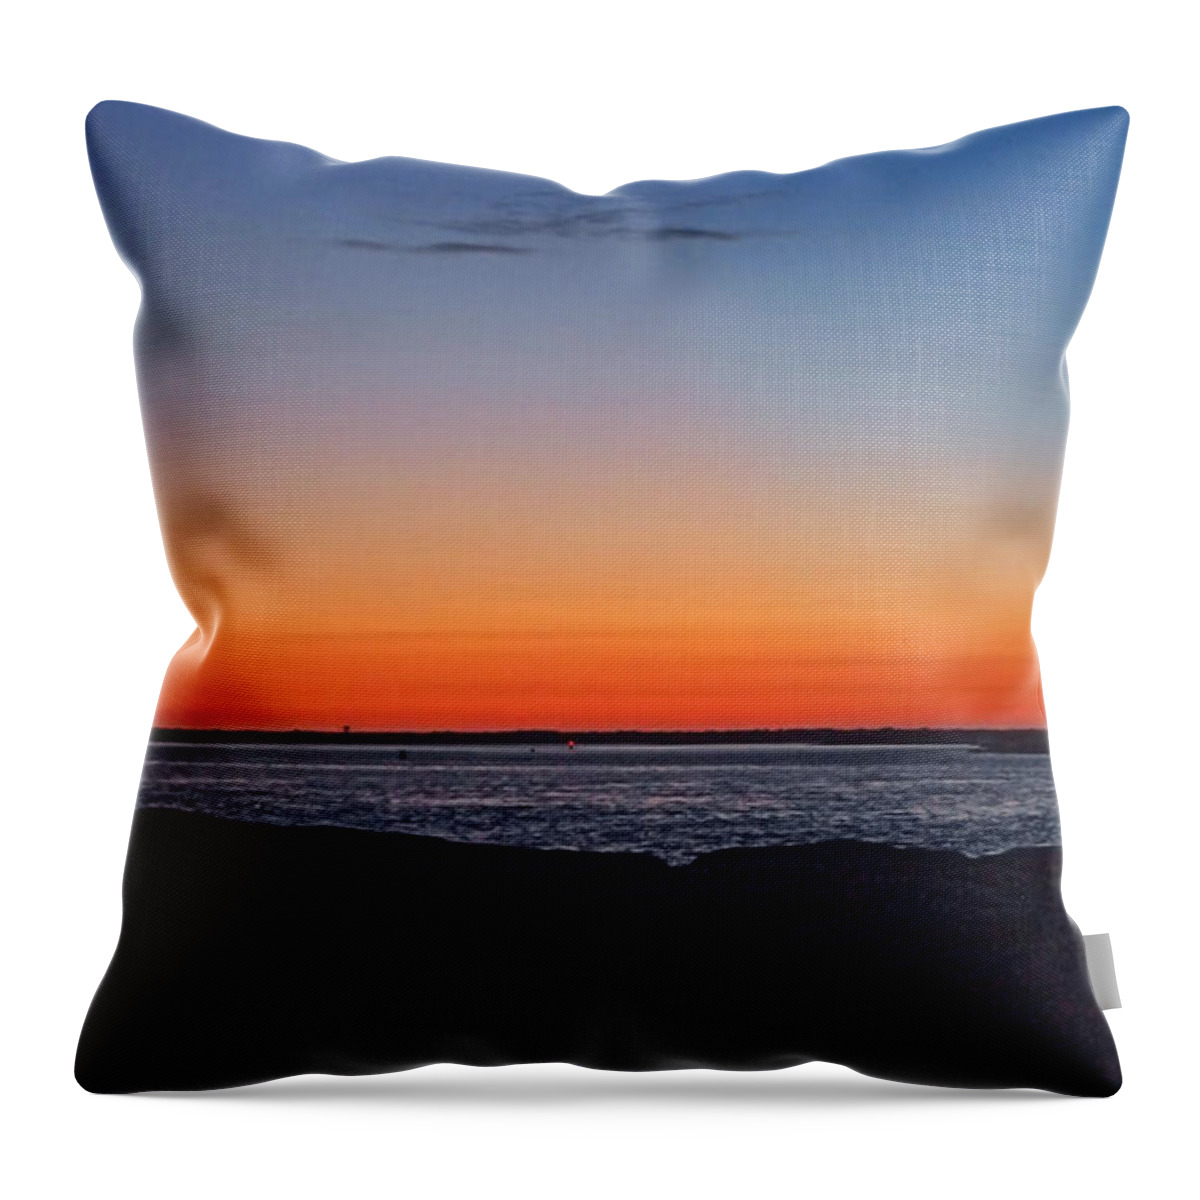 Sunrise Throw Pillow featuring the photograph Days Pre Dawn by Newwwman